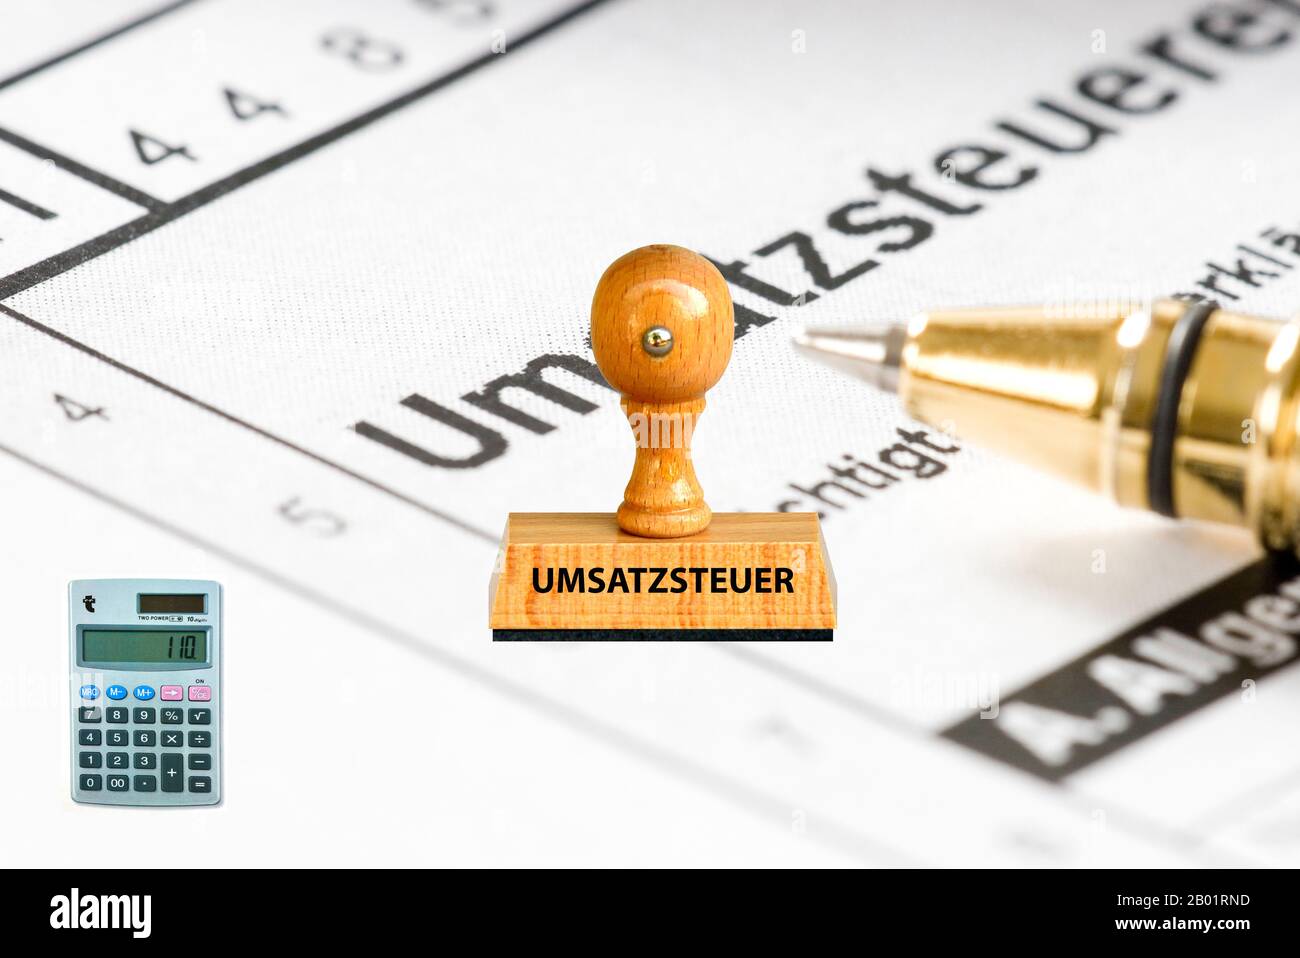 stamp lettering Umsatzsteuer, added taxes, application and calculatur in the background, Germany Stock Photo